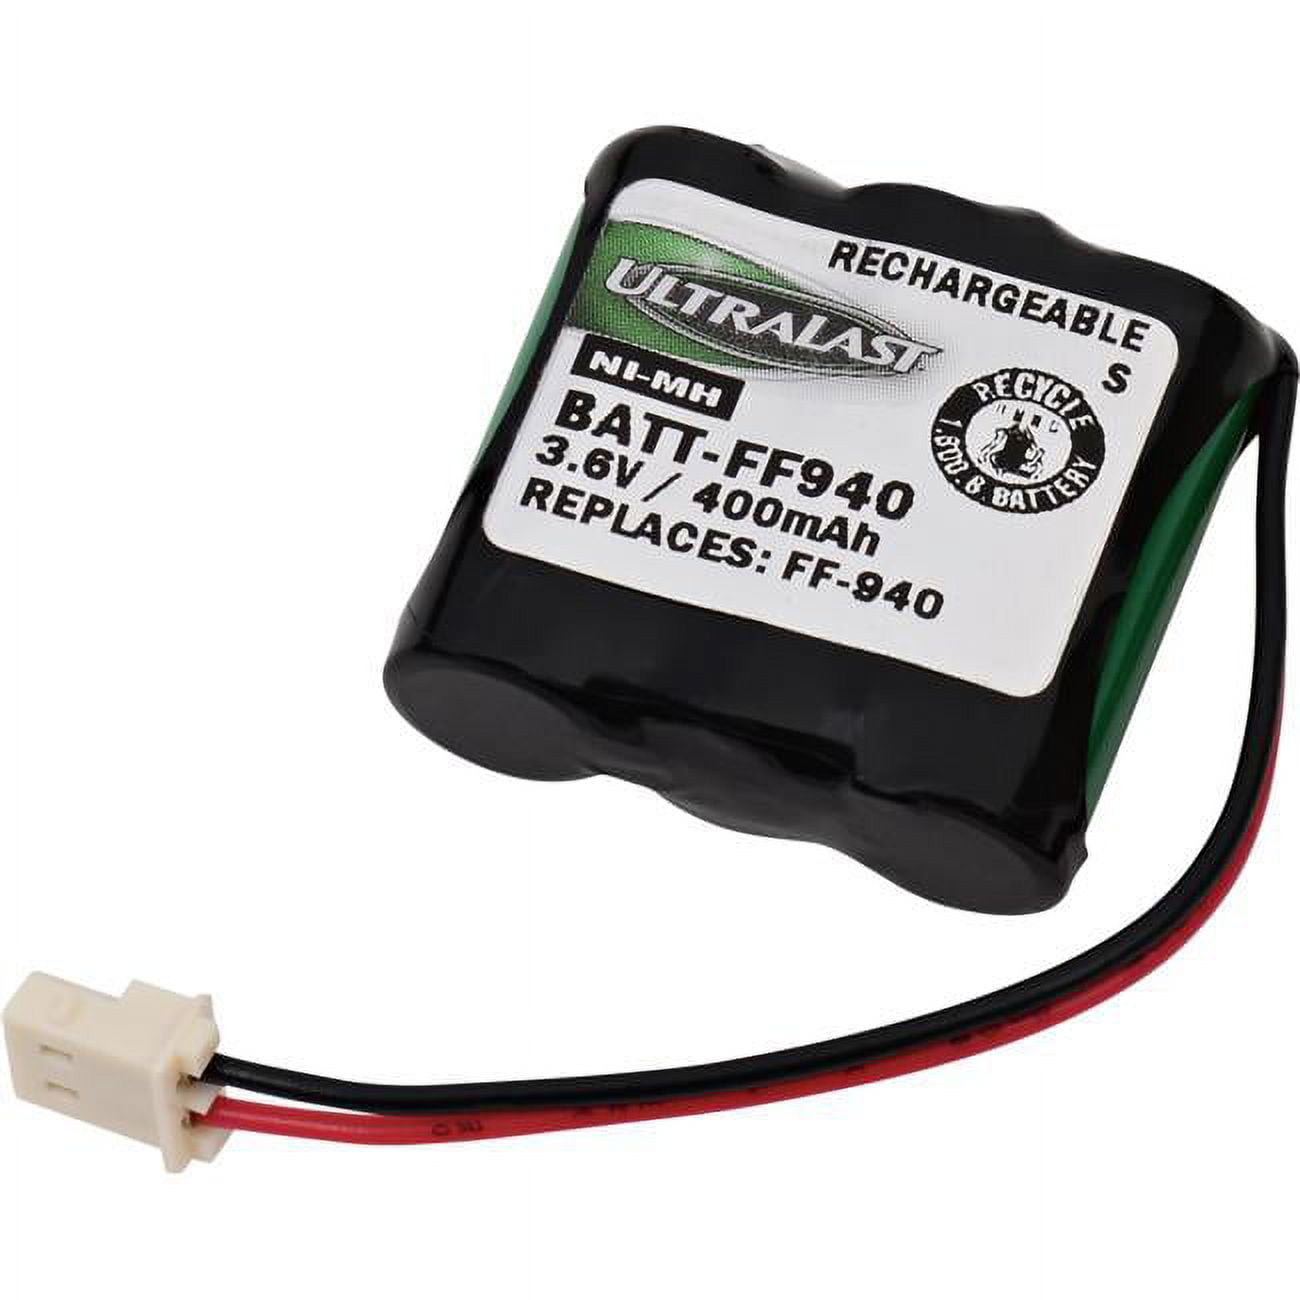 Picture of Ultralast BATT-FF940 3.6V & 400 mAh Replacement Nickel Metal Hydride Battery fits forSouthwestern Bell - FF940 Cordless Phone